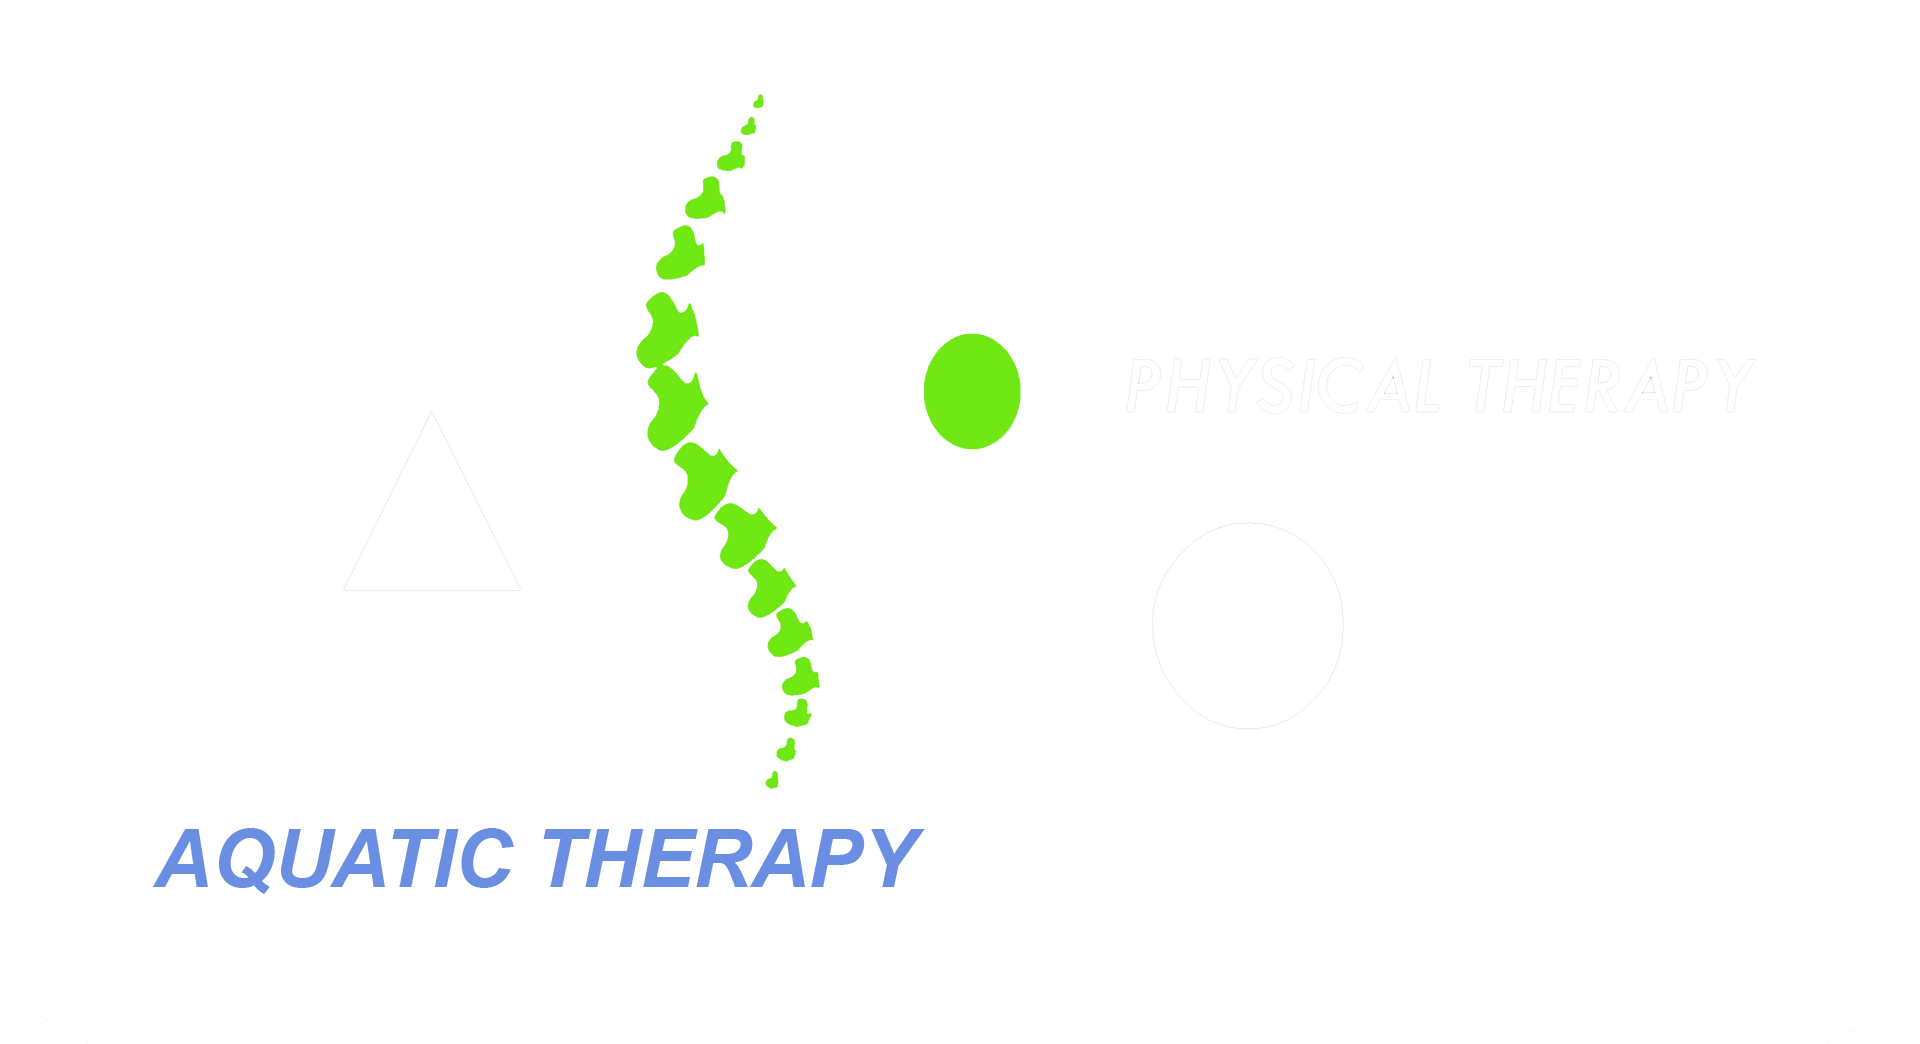 Align Physical Therapy